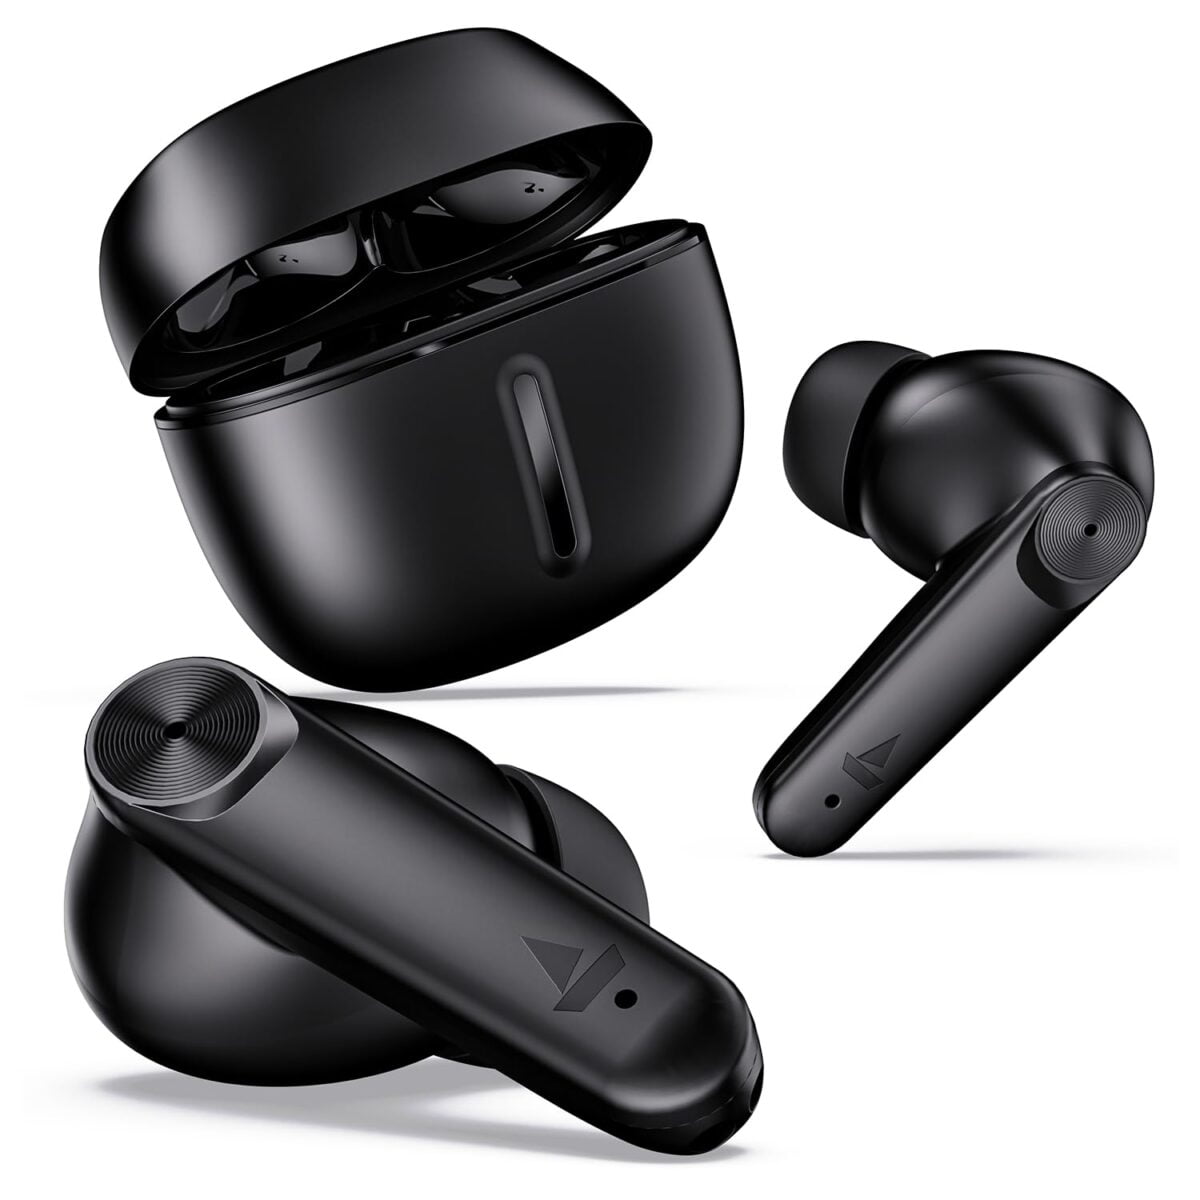 Boat airdopes max tws earbuds with 100 hrs playtime (black)